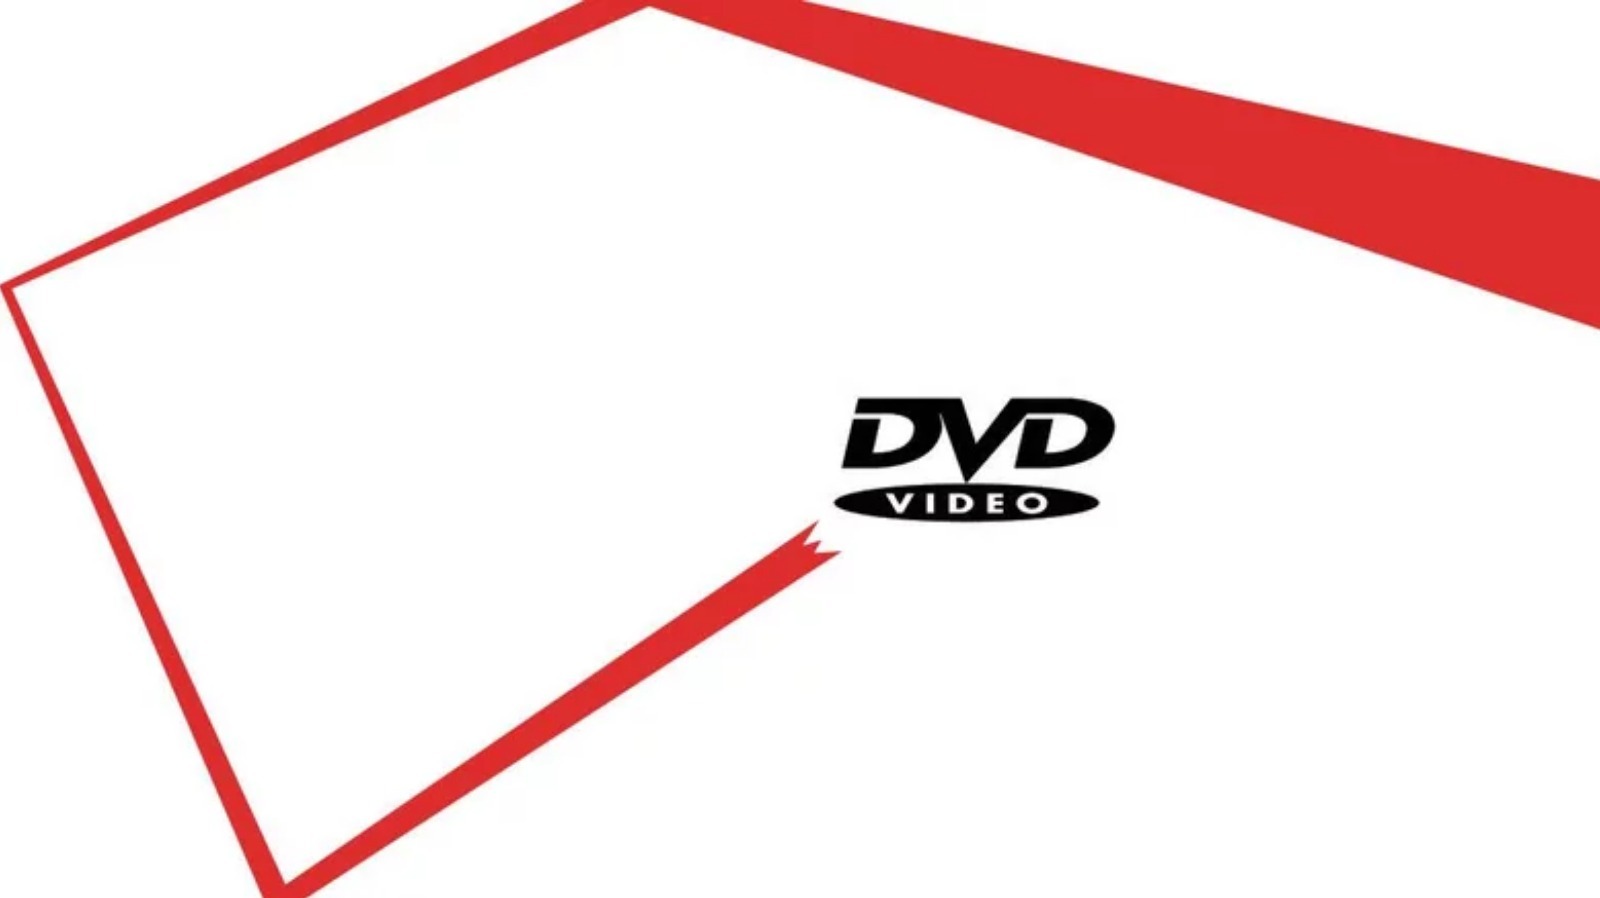 Every time the DVD Screensaver hits the corner i add another DVD